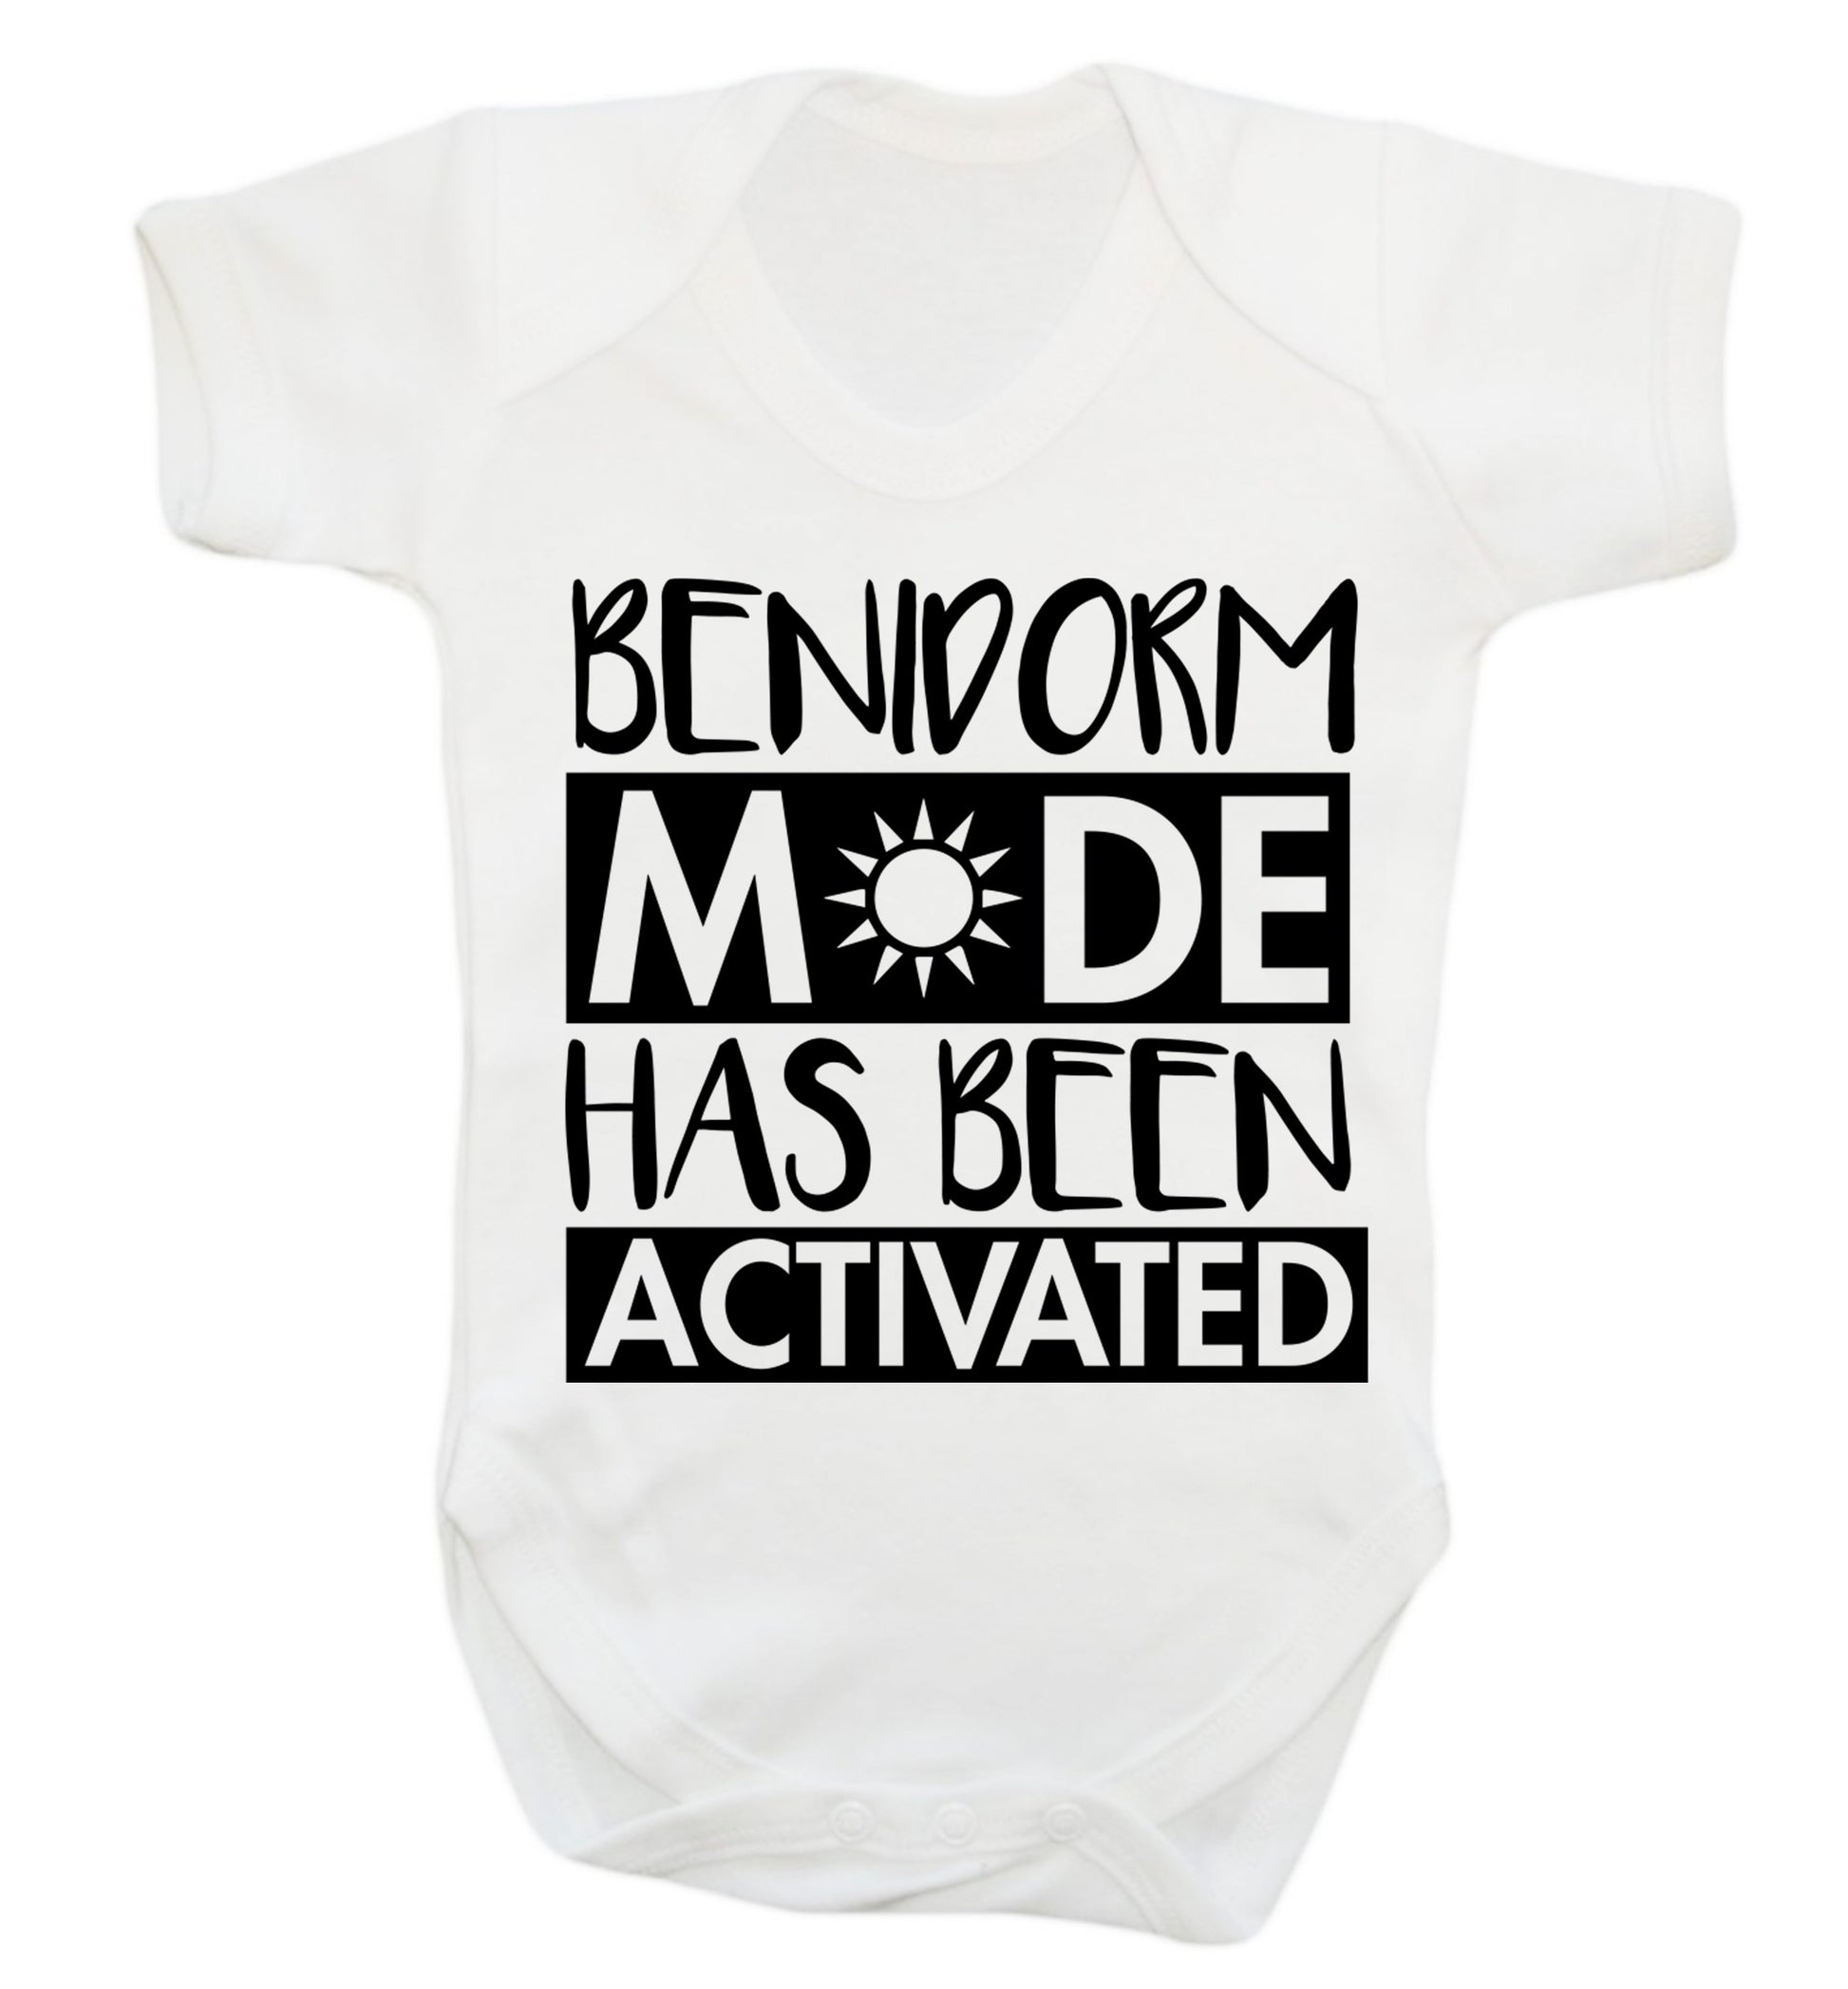 Benidorm mode has been activated Baby Vest white 18-24 months